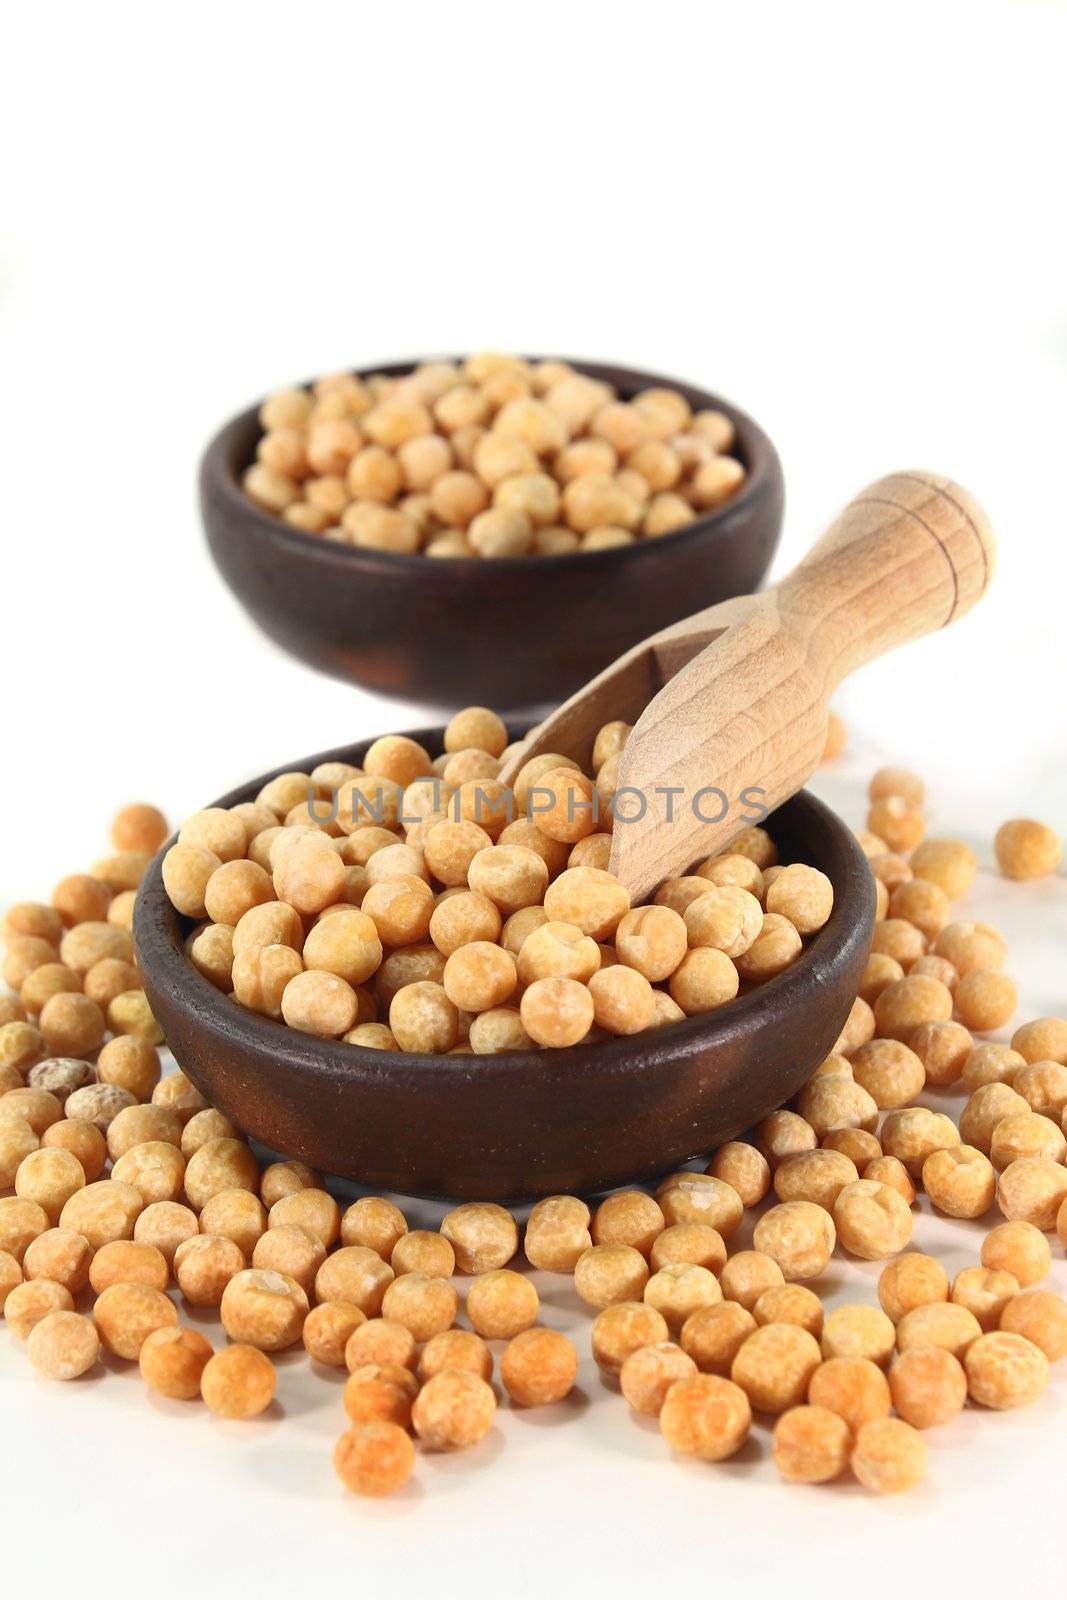 yellow peas and a shovel on a white background